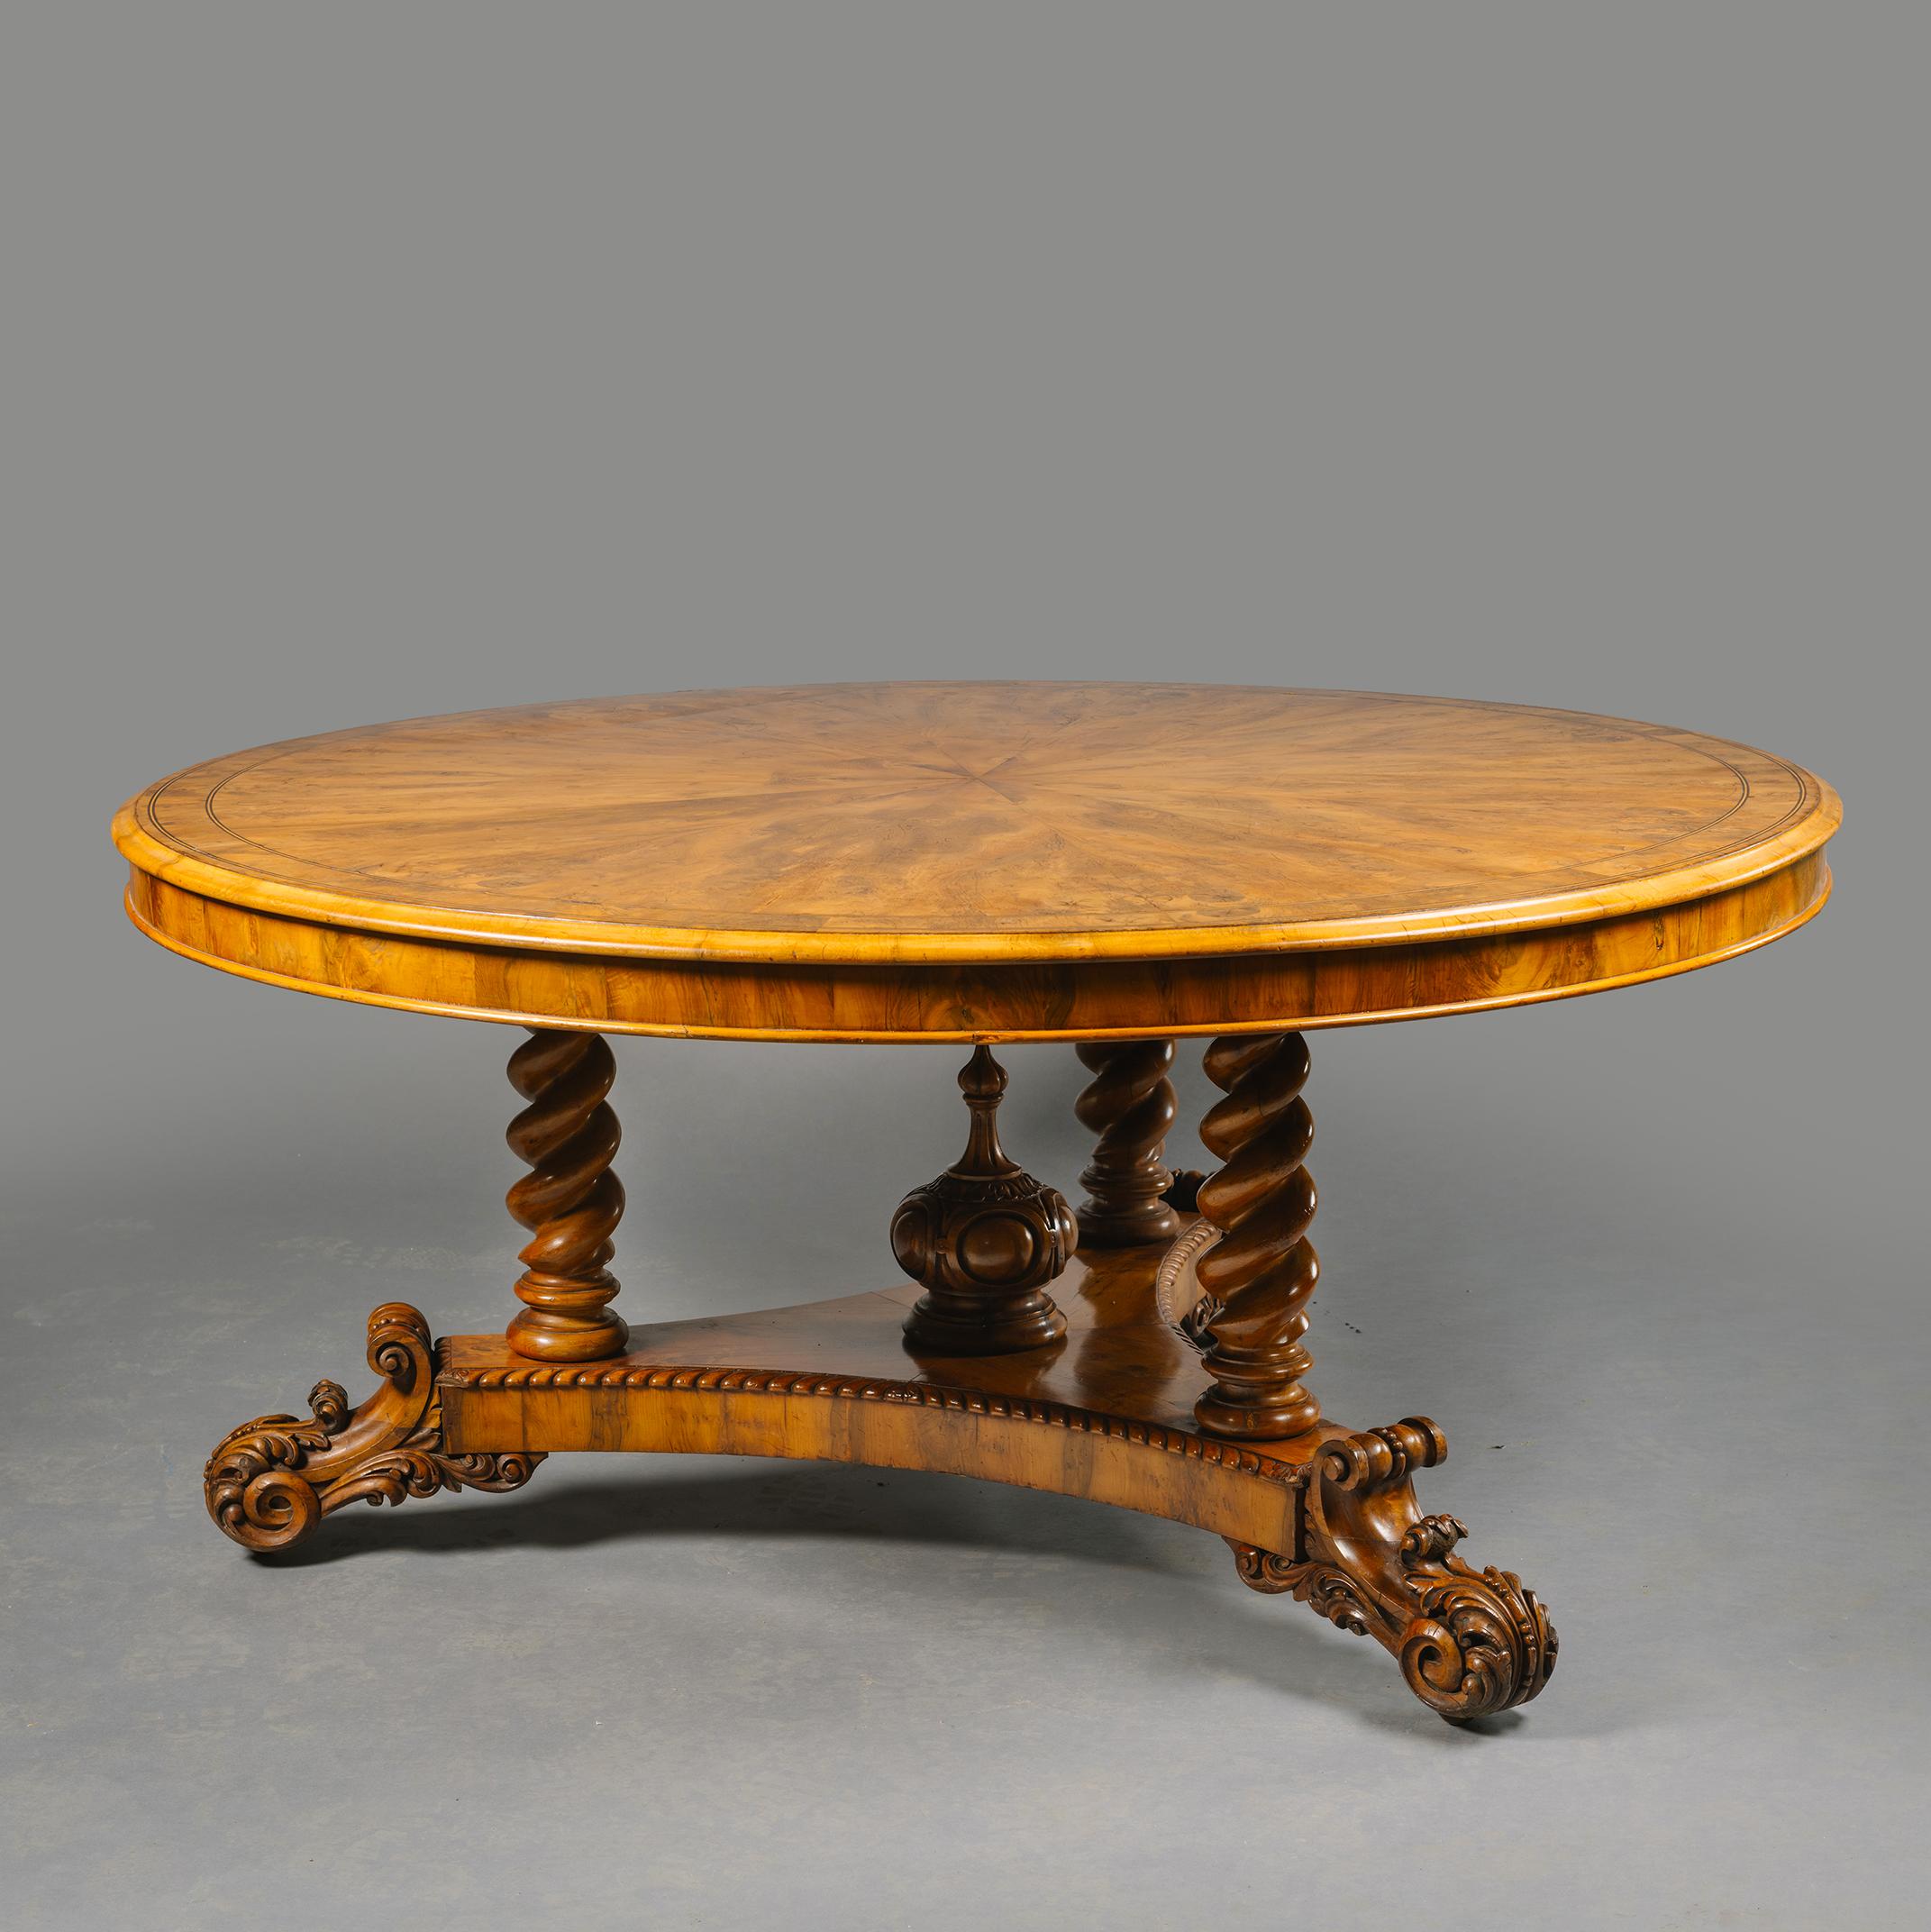 English A Large William IV Yew Wood Centre Table For Sale